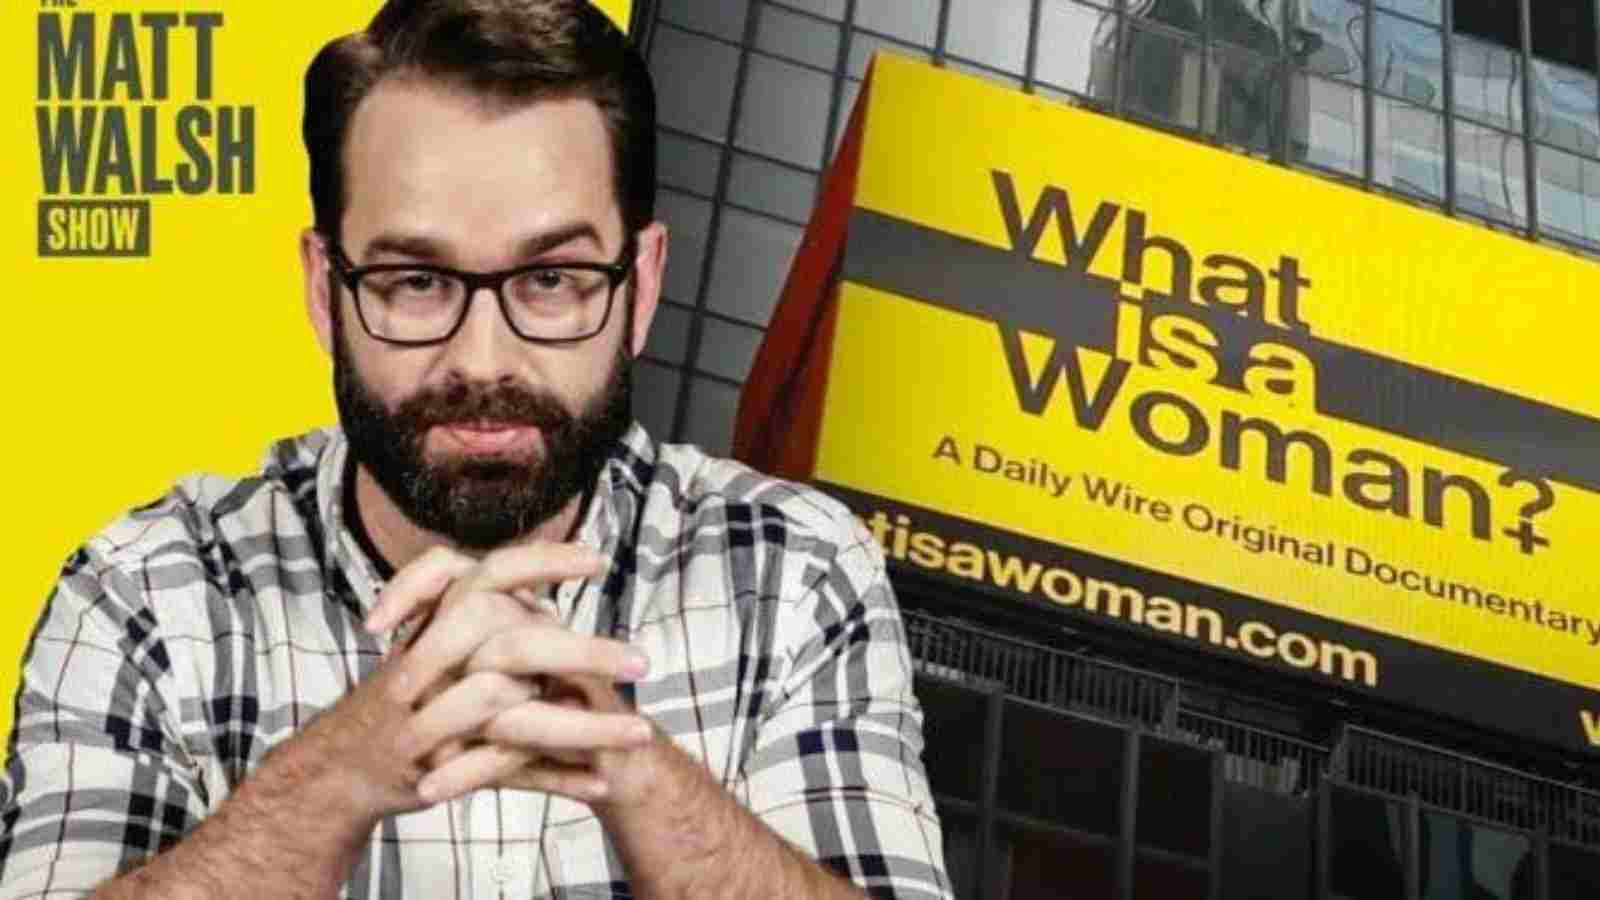 "What is a Woman" documentary by Matt Walsh is Transphobic